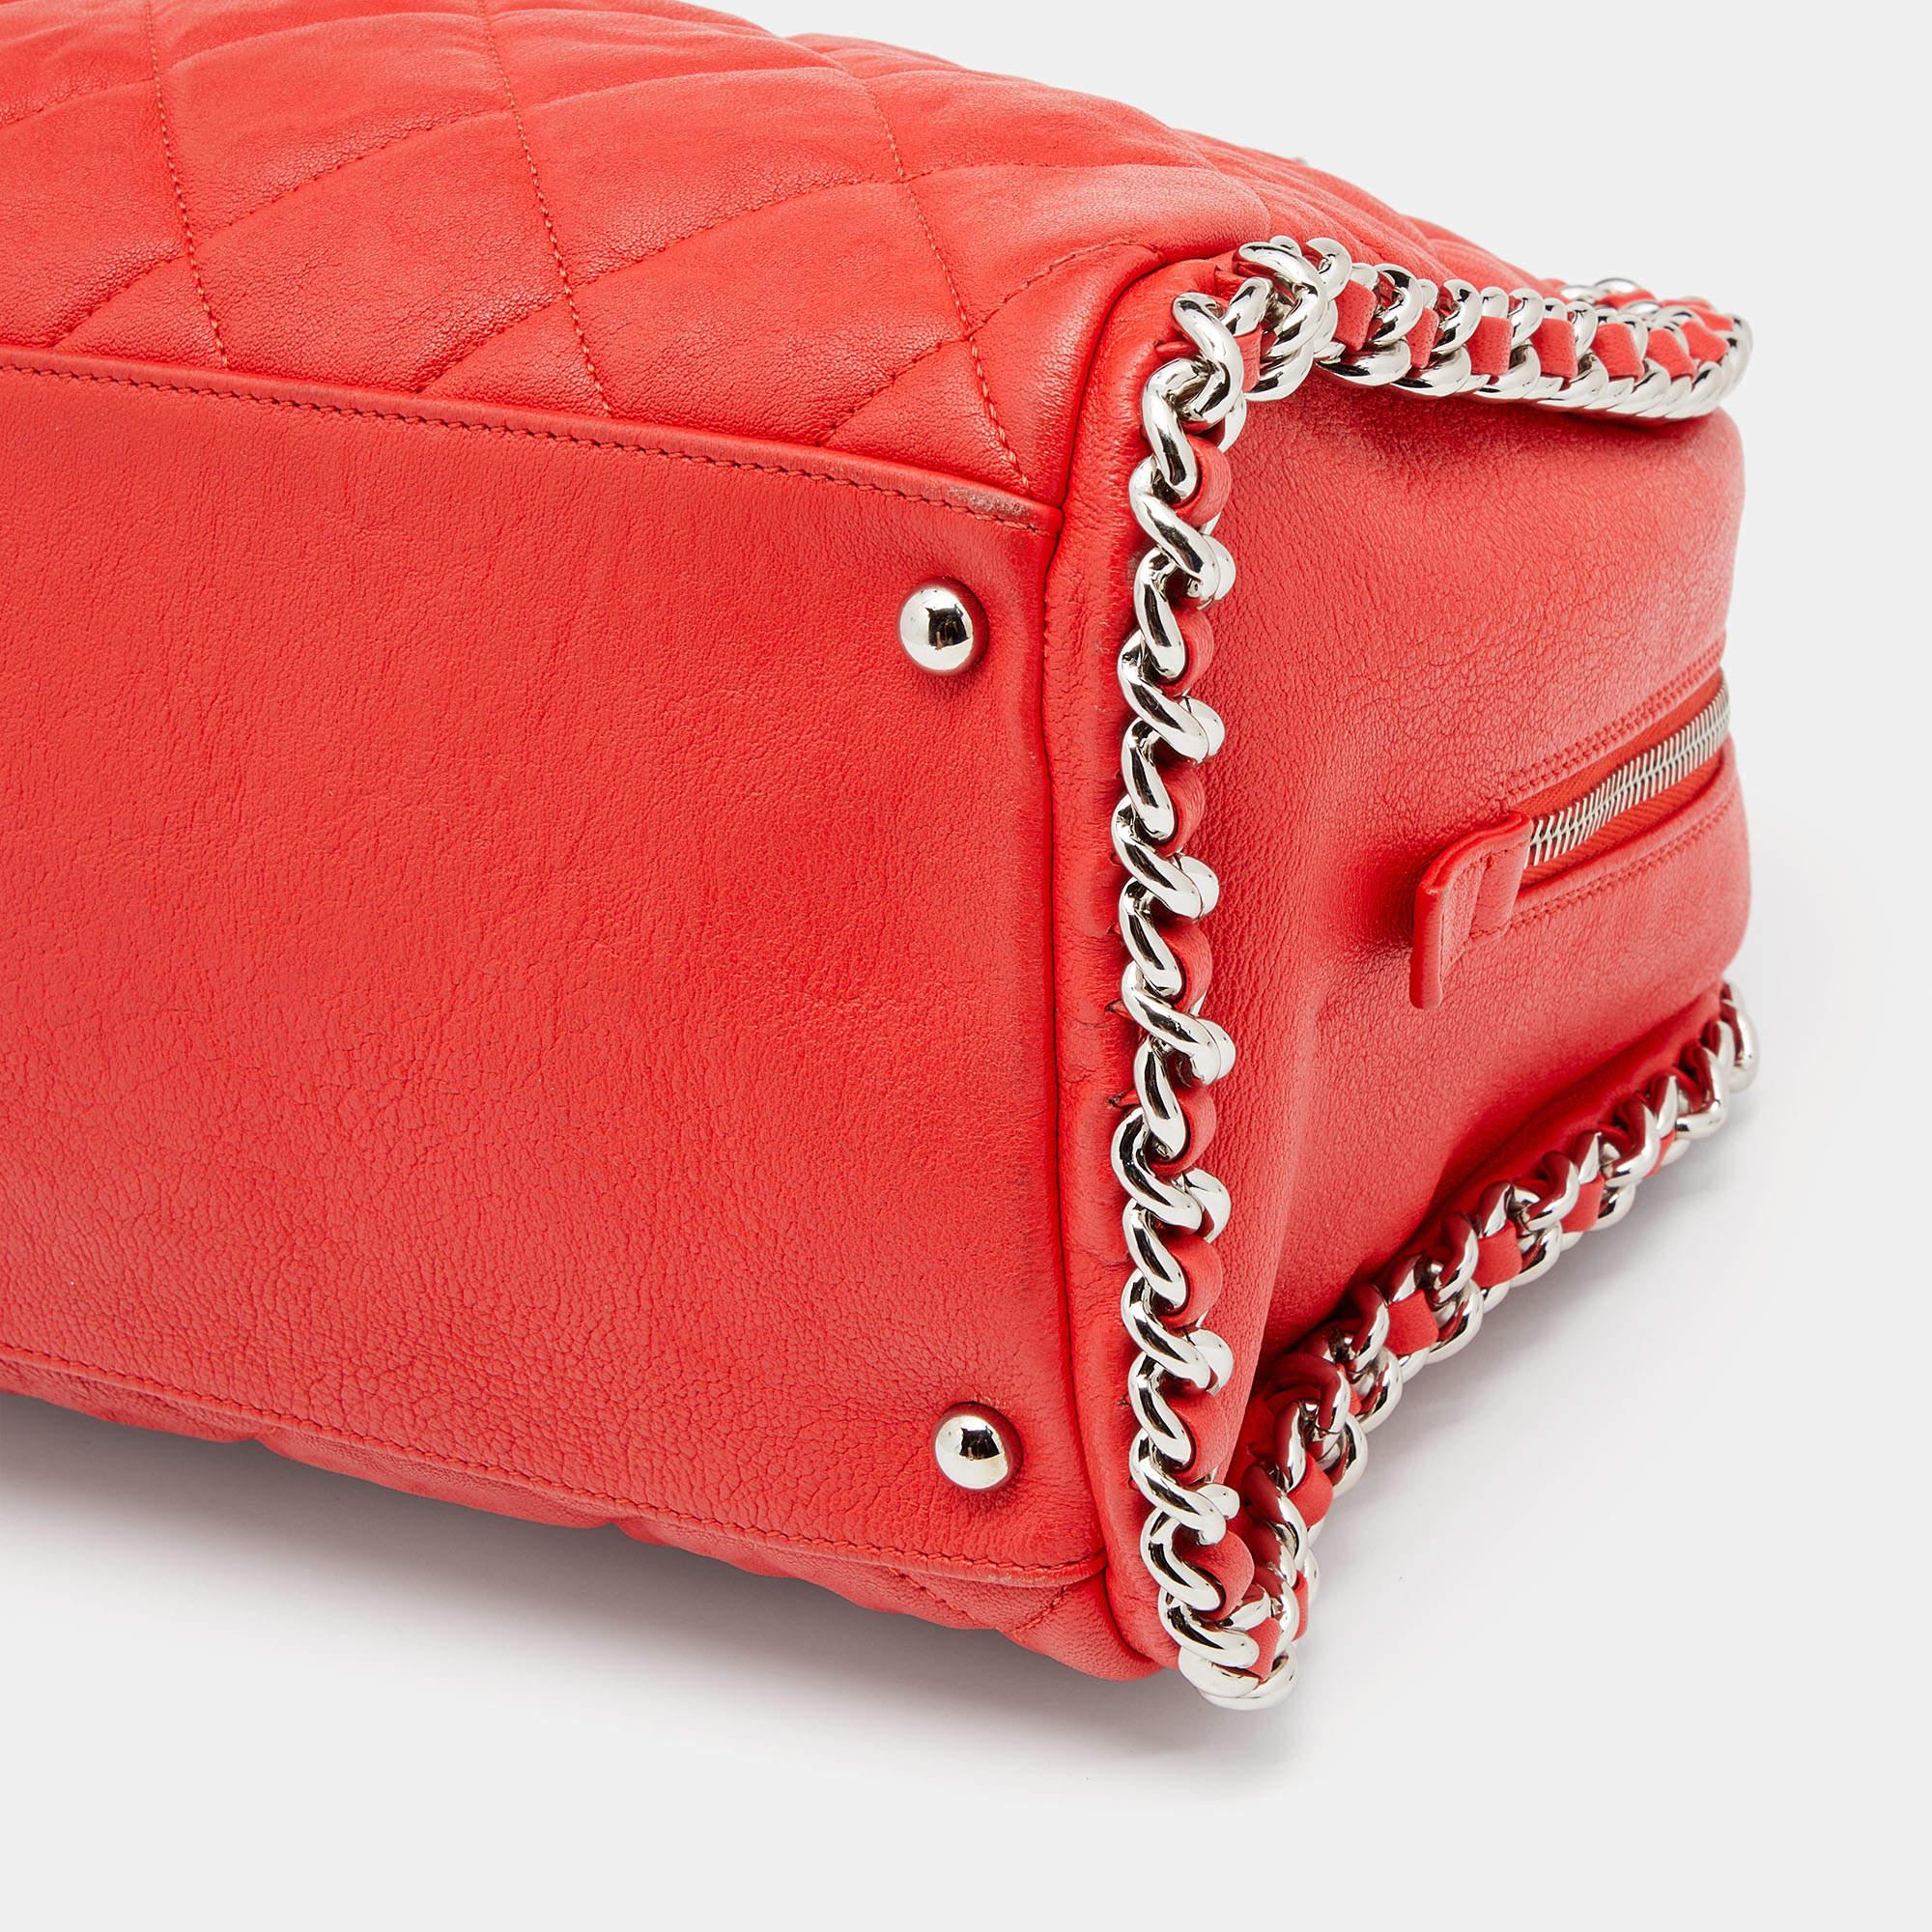 Chanel Red Quilted Leather Chain Around Bowler Bag 1